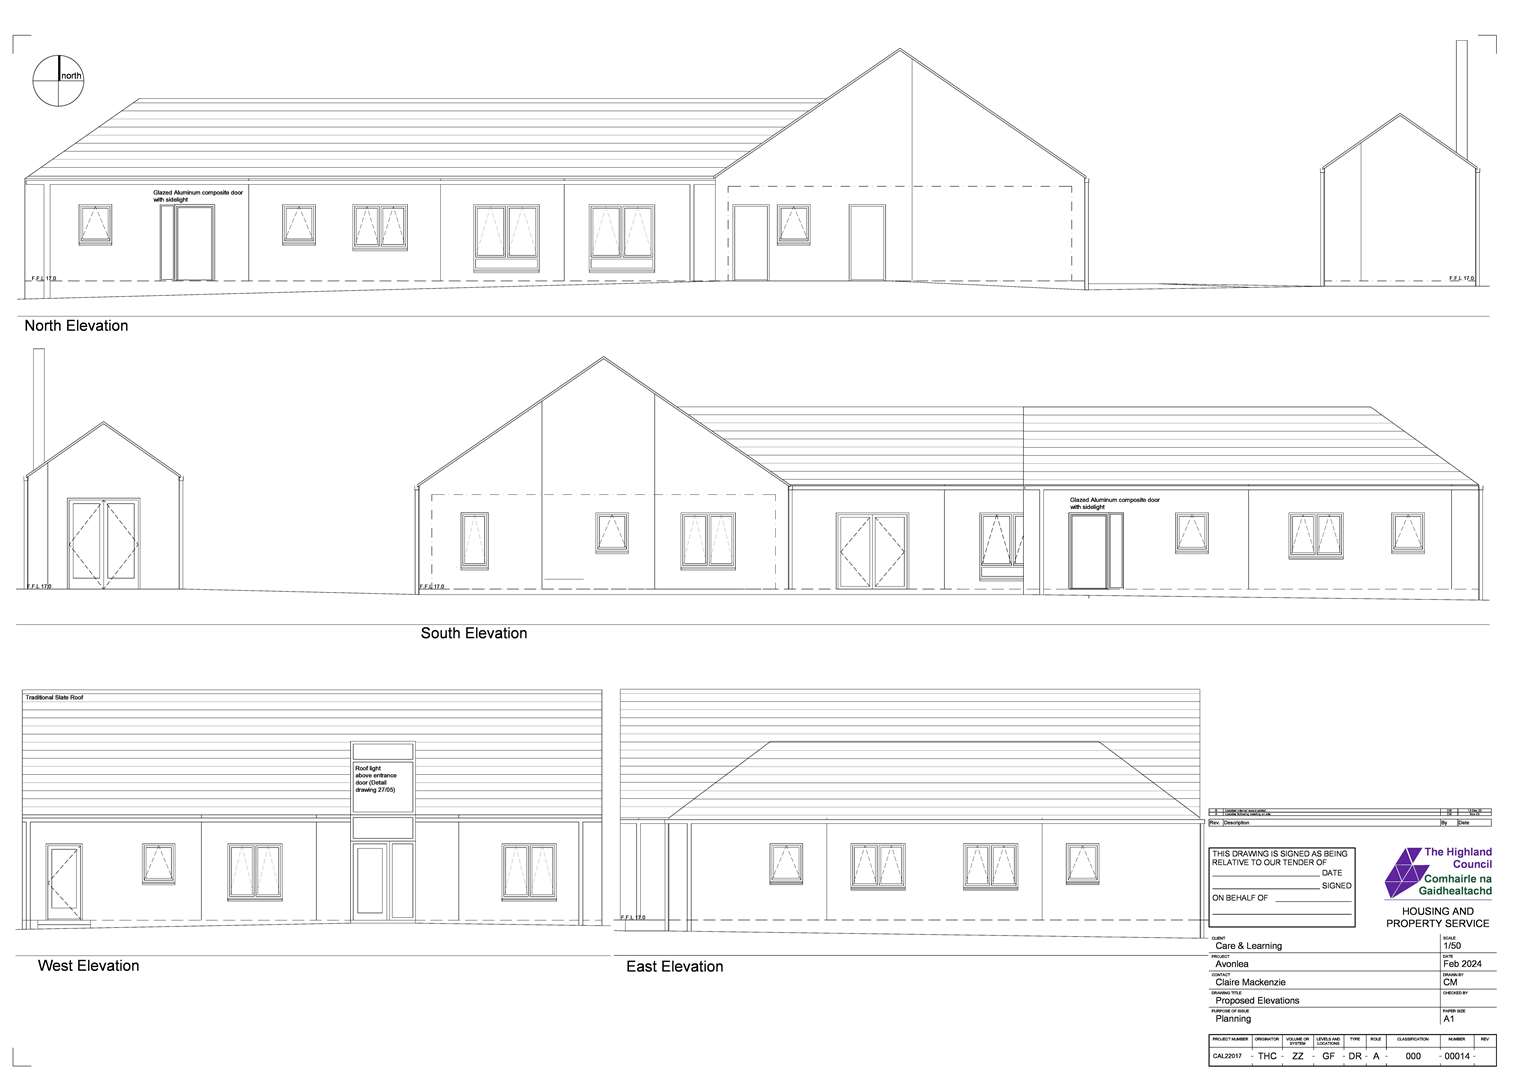 Proposed elevation plan at the site on West Banks Avenue in Wick.